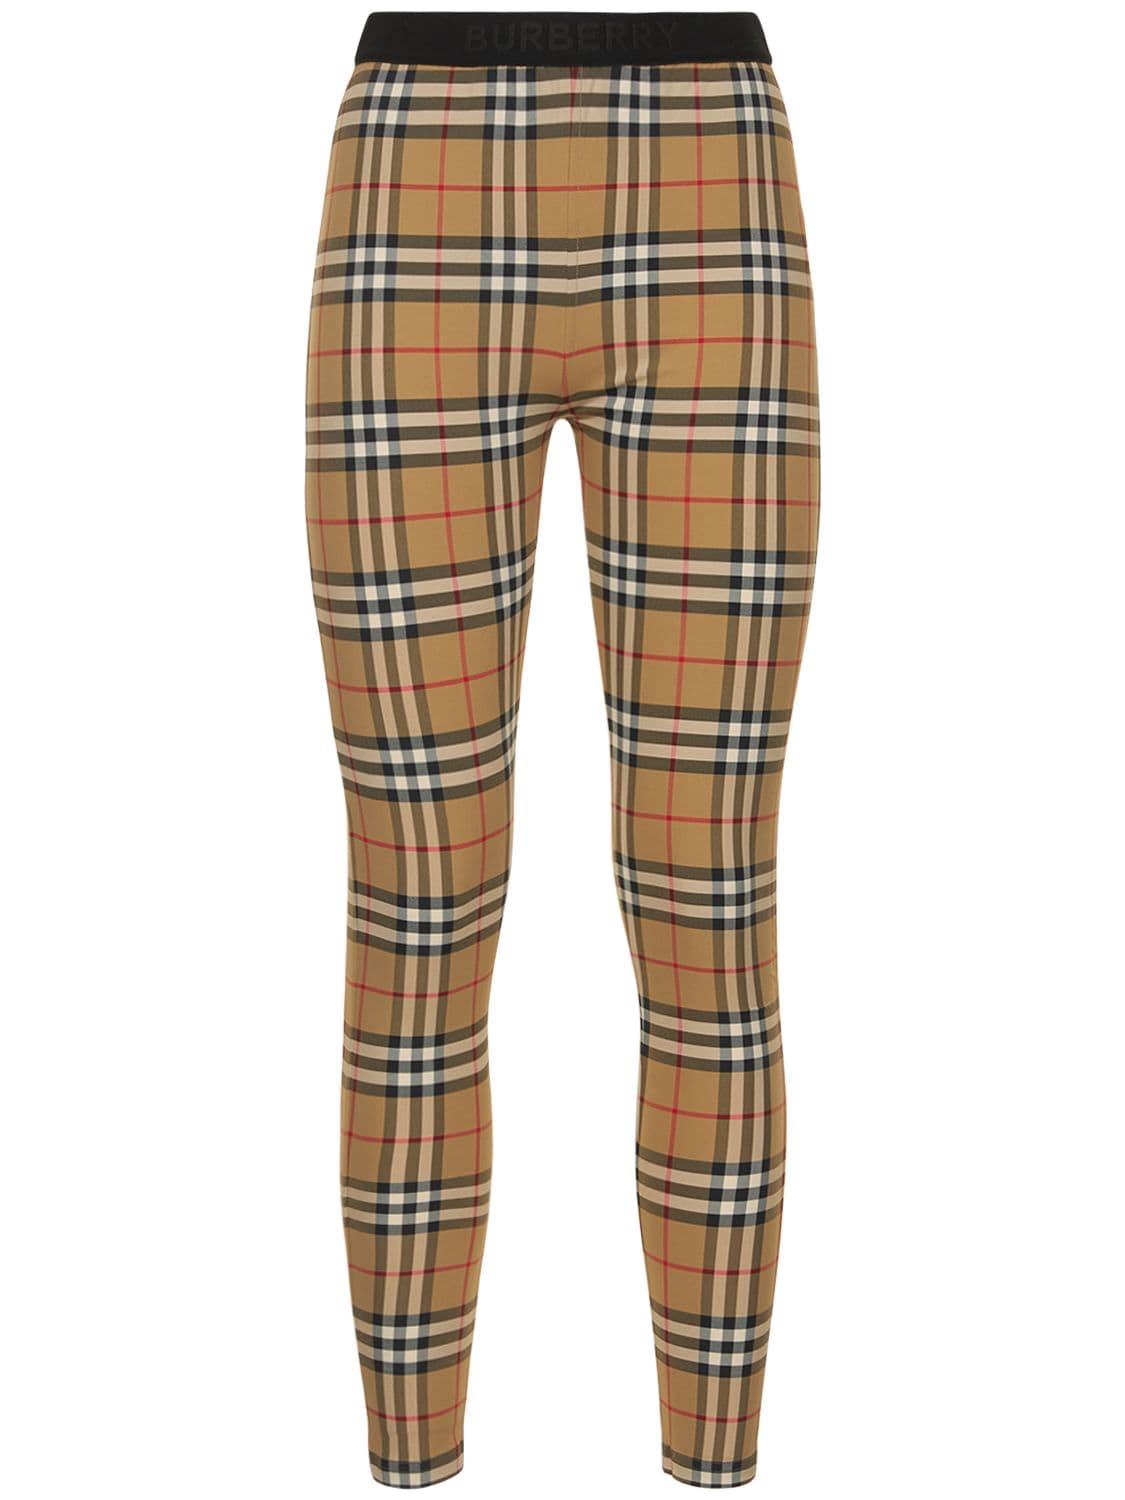 Burberry High Waist Check Printed Leggings In Multicolor